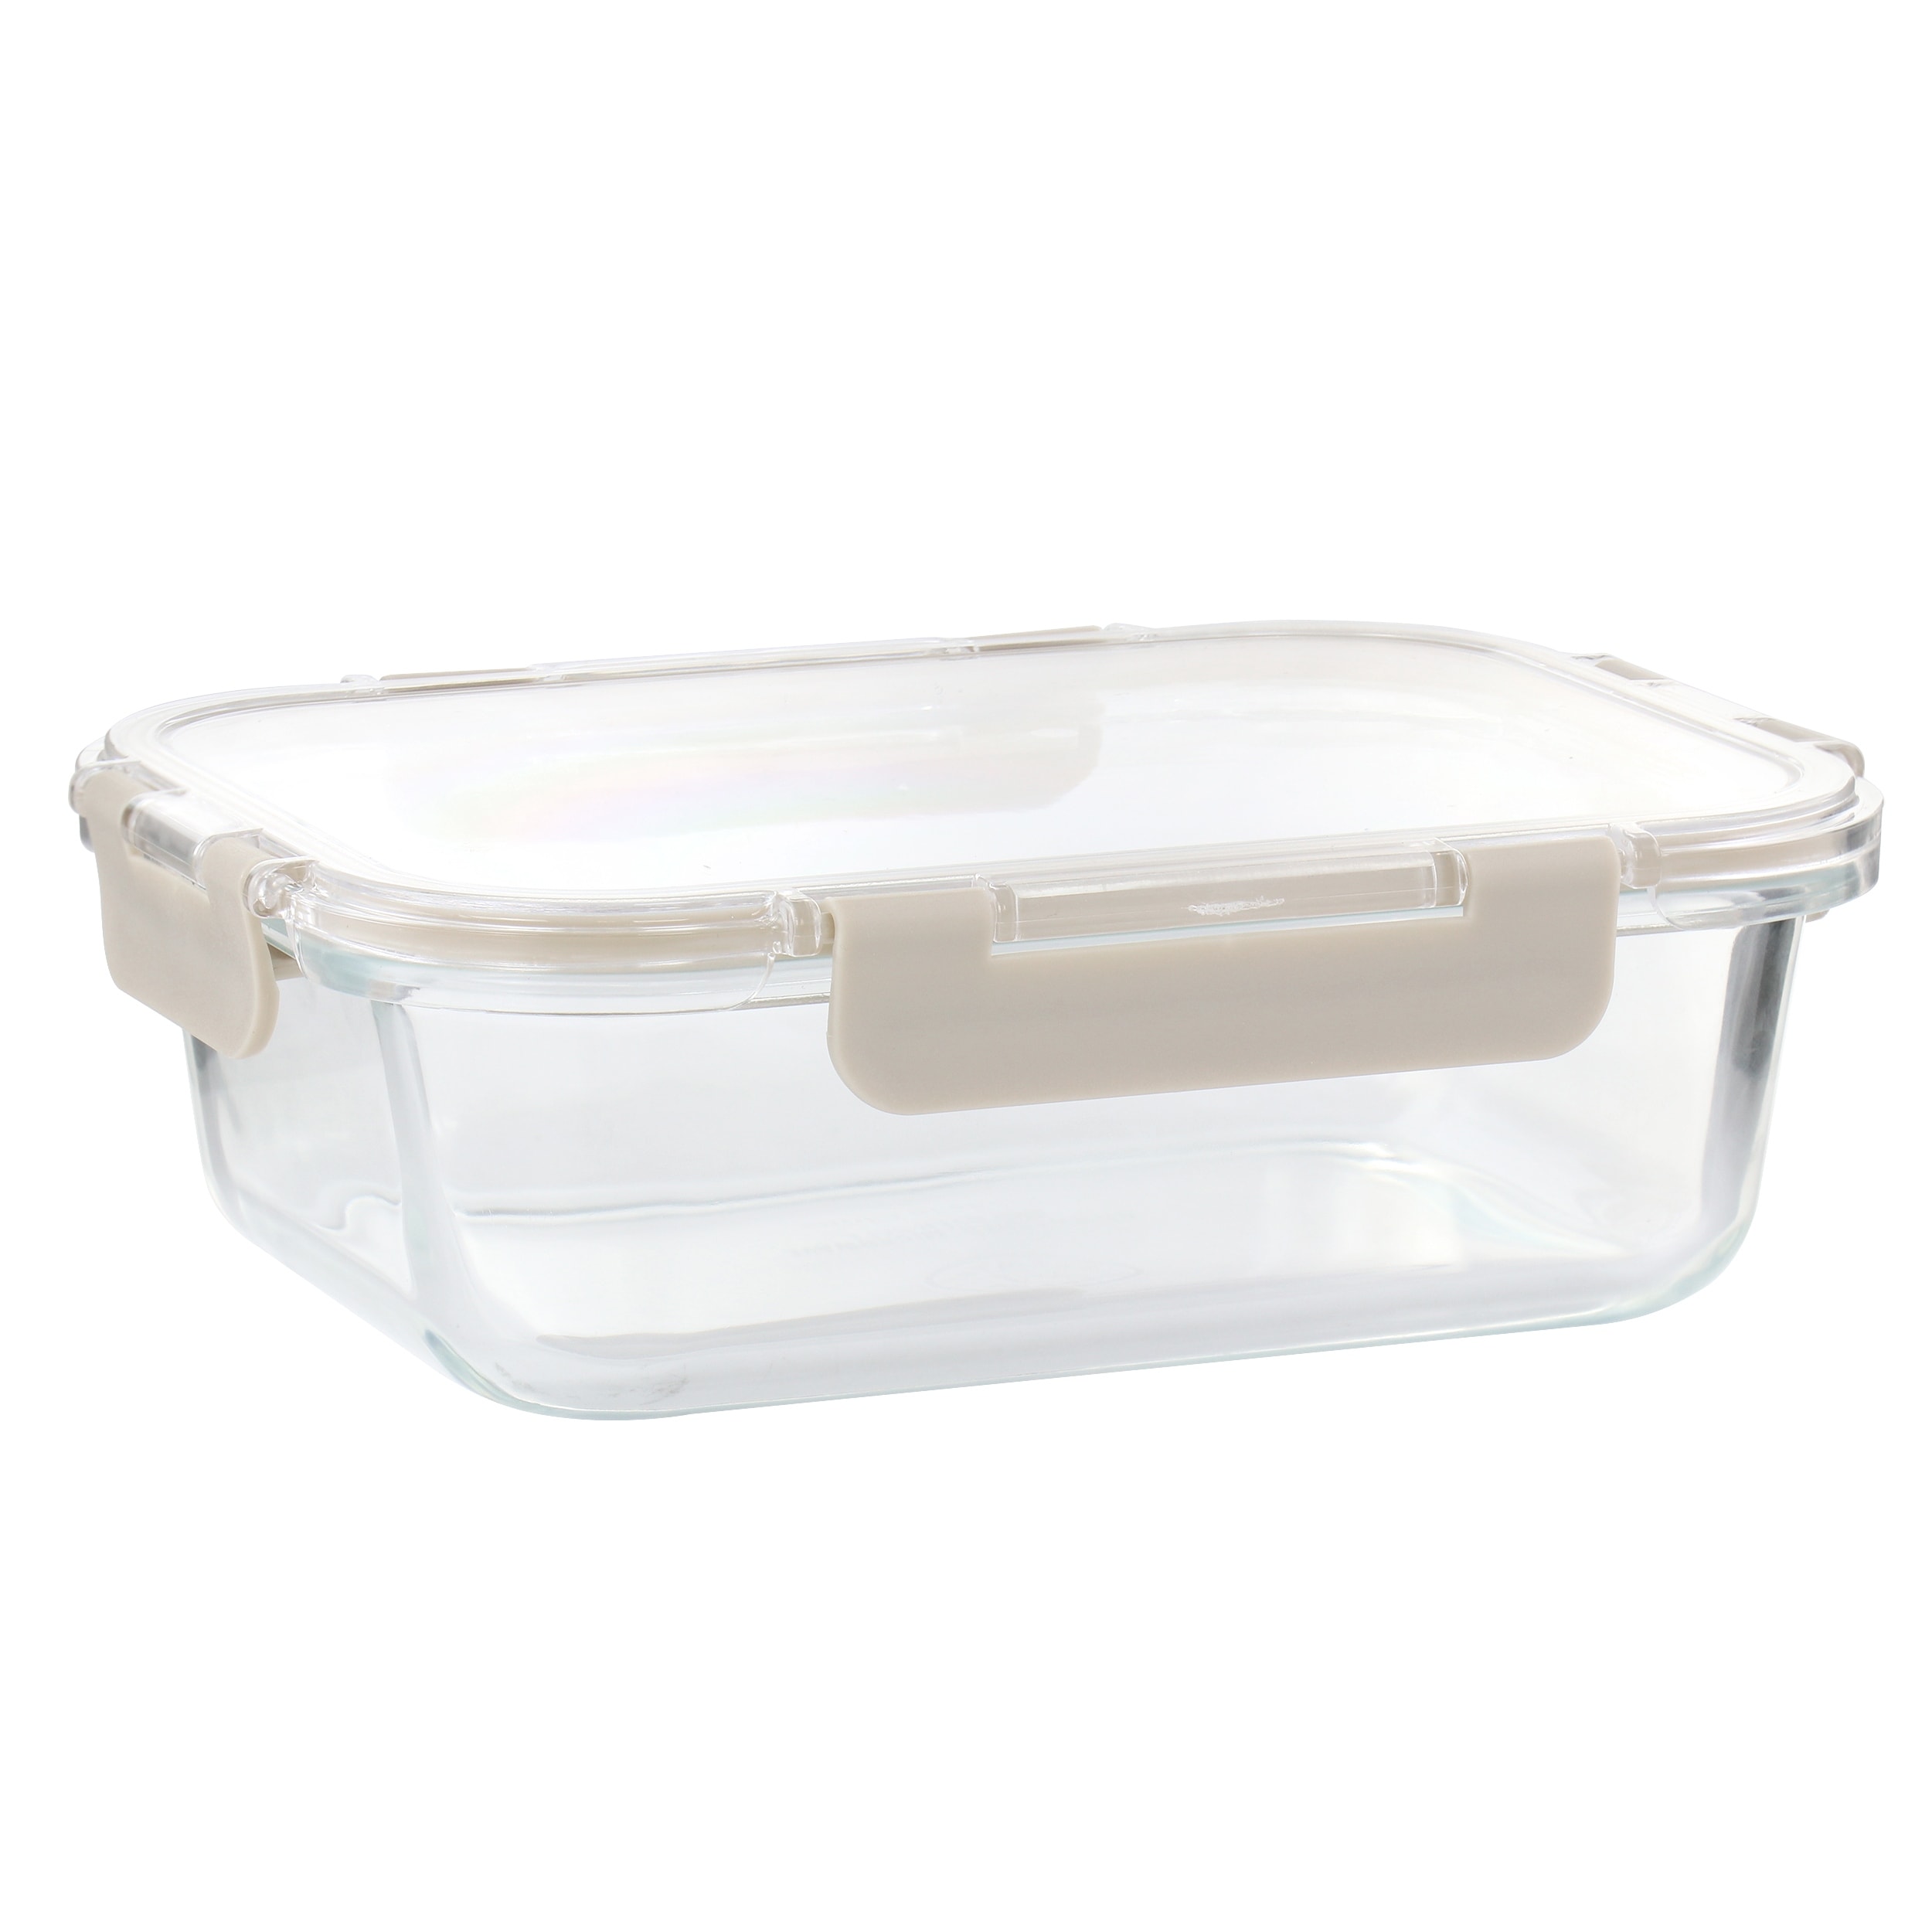 https://ak1.ostkcdn.com/images/products/is/images/direct/ff765a969d859e67f5417f16fb60855c6f740709/21-Ounce-Rectangular-Glass-Container-with-Snap-On-Lid.jpg